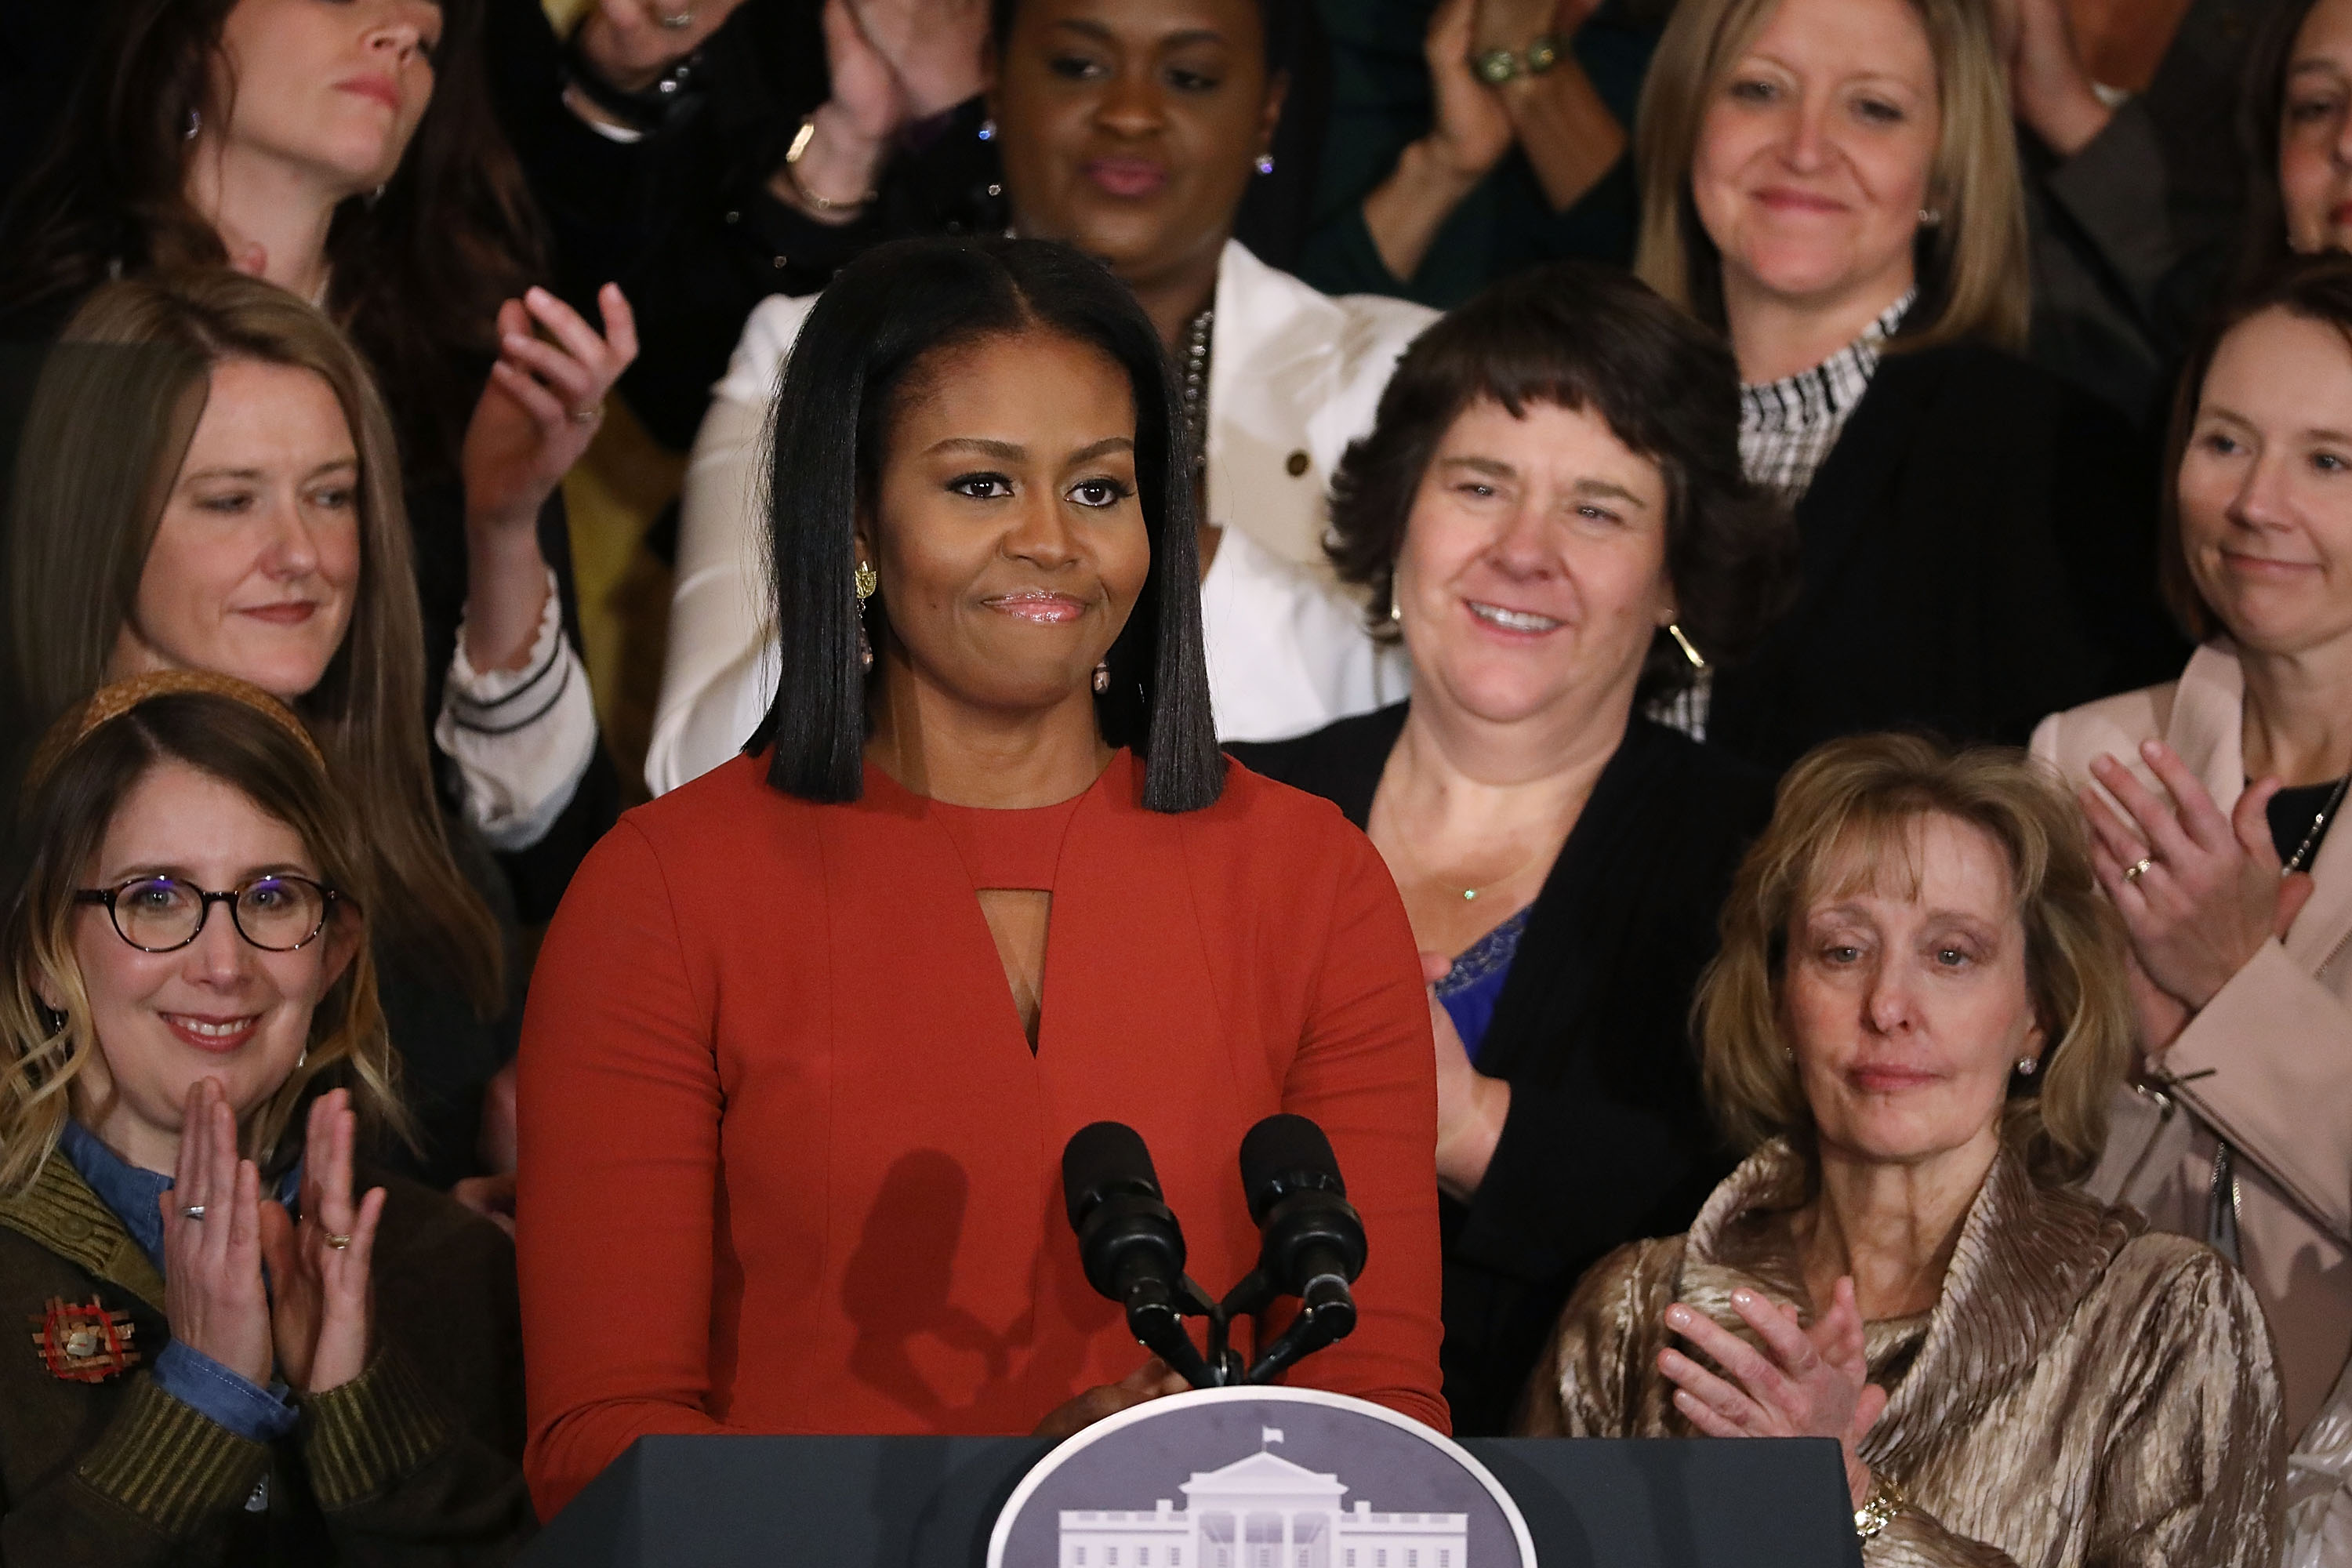 U.S. first lady Michelle Obama delivers remarks during a ceremony honoring the 2017 School Counselor of the Year in the East Room of the White House January 6, 2017 in Washington, DC. These were the last public remarks by the first lady during her husband Barack Obama's presidency. (Chip Somodevilla—Getty Images)